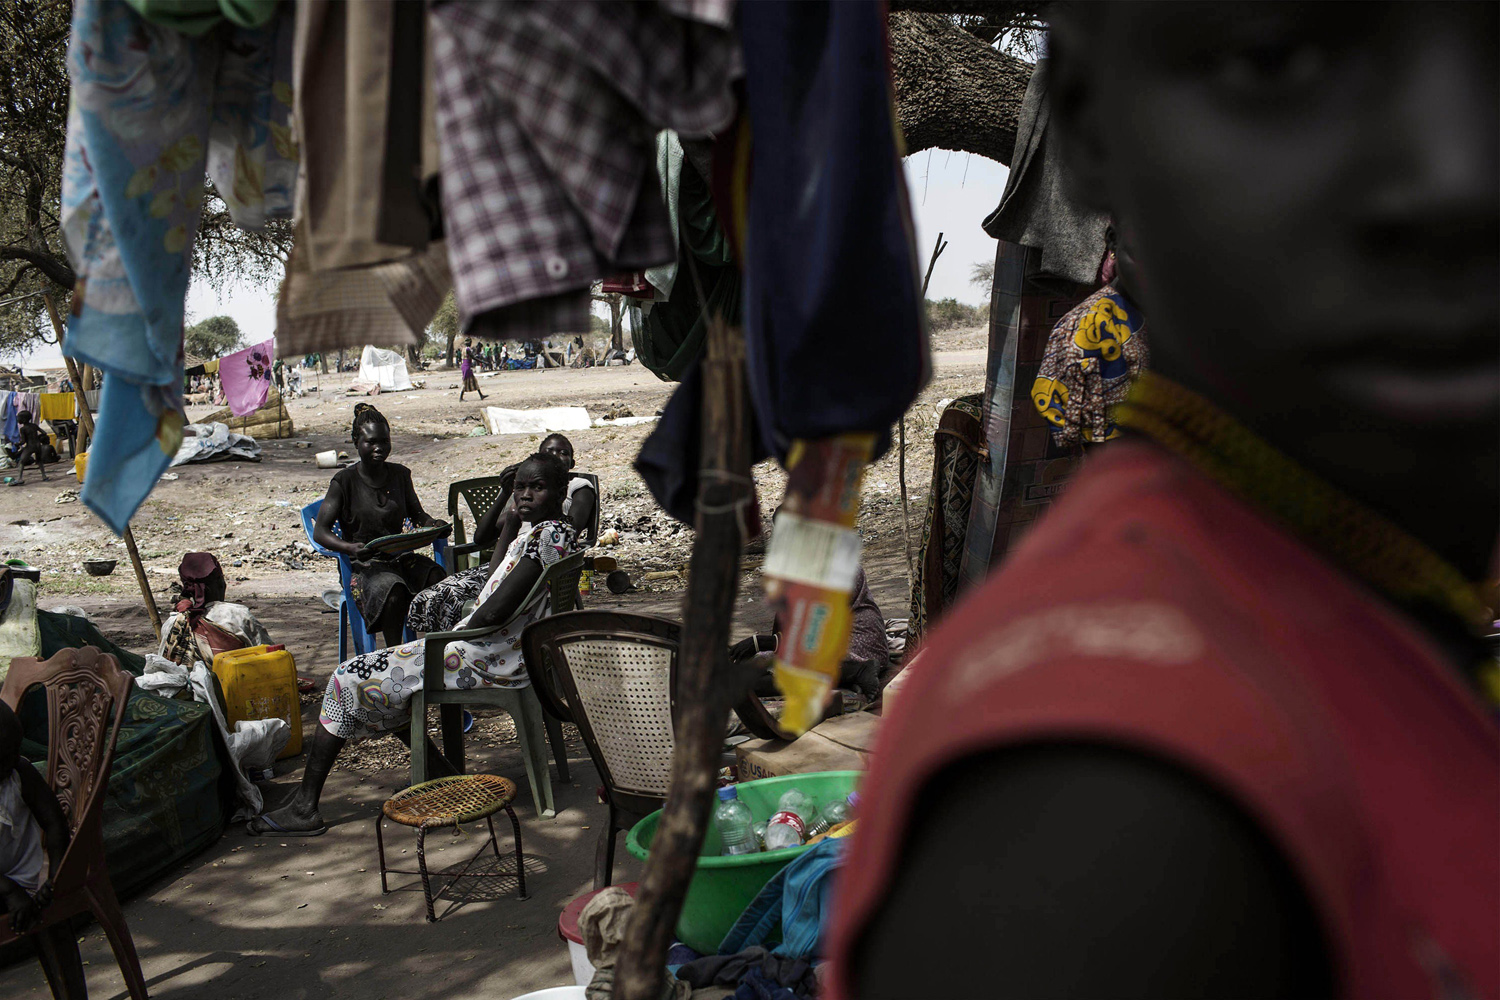 Feb. 5, 2014. Internally displaced South Sudanese in a temporary camp in Mingkaman, South Sudan.